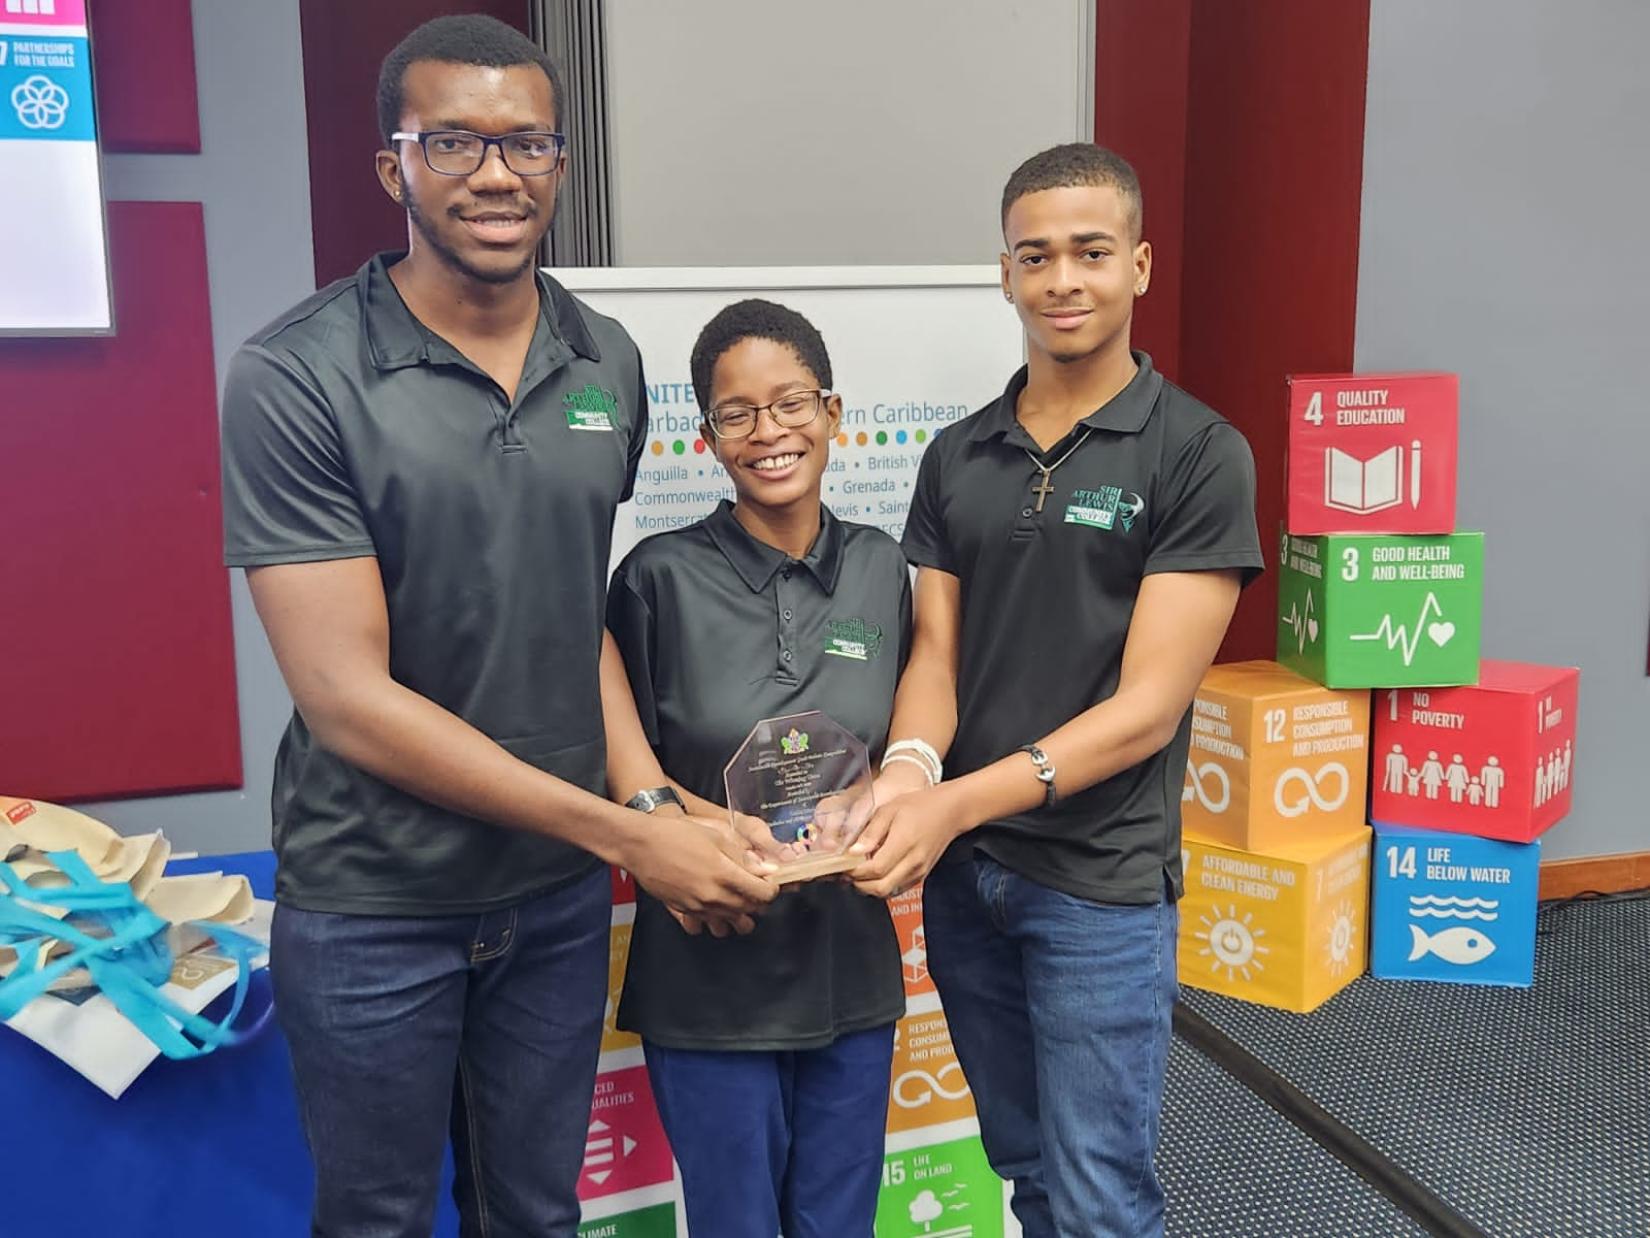 three young people hold an award together smiling with SDG blocks and an SDG banner in the background